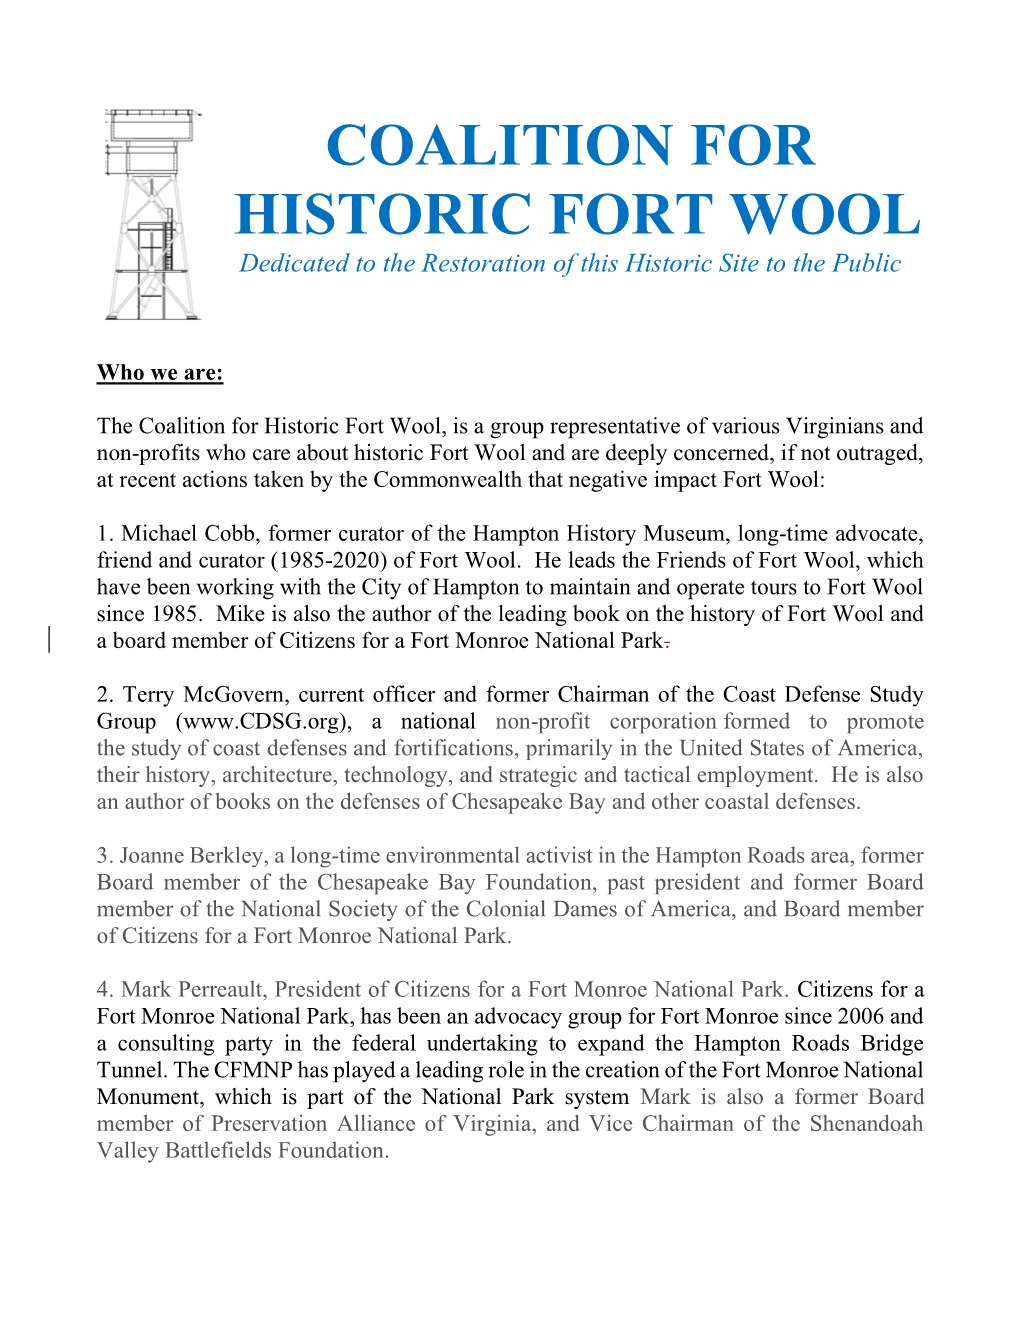 Save Fort Wool